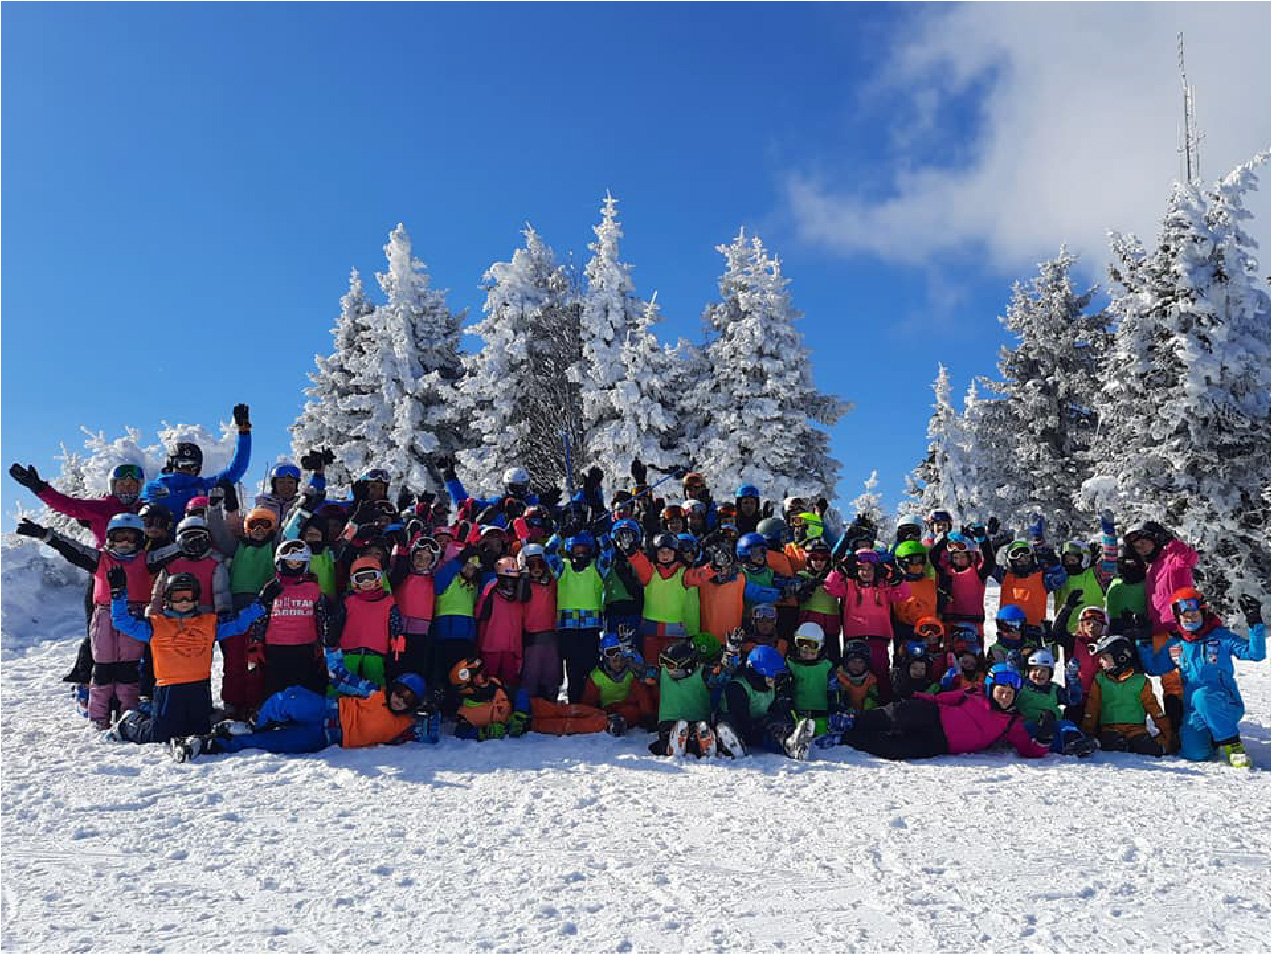 Creating unforgettable memories on the white slopes